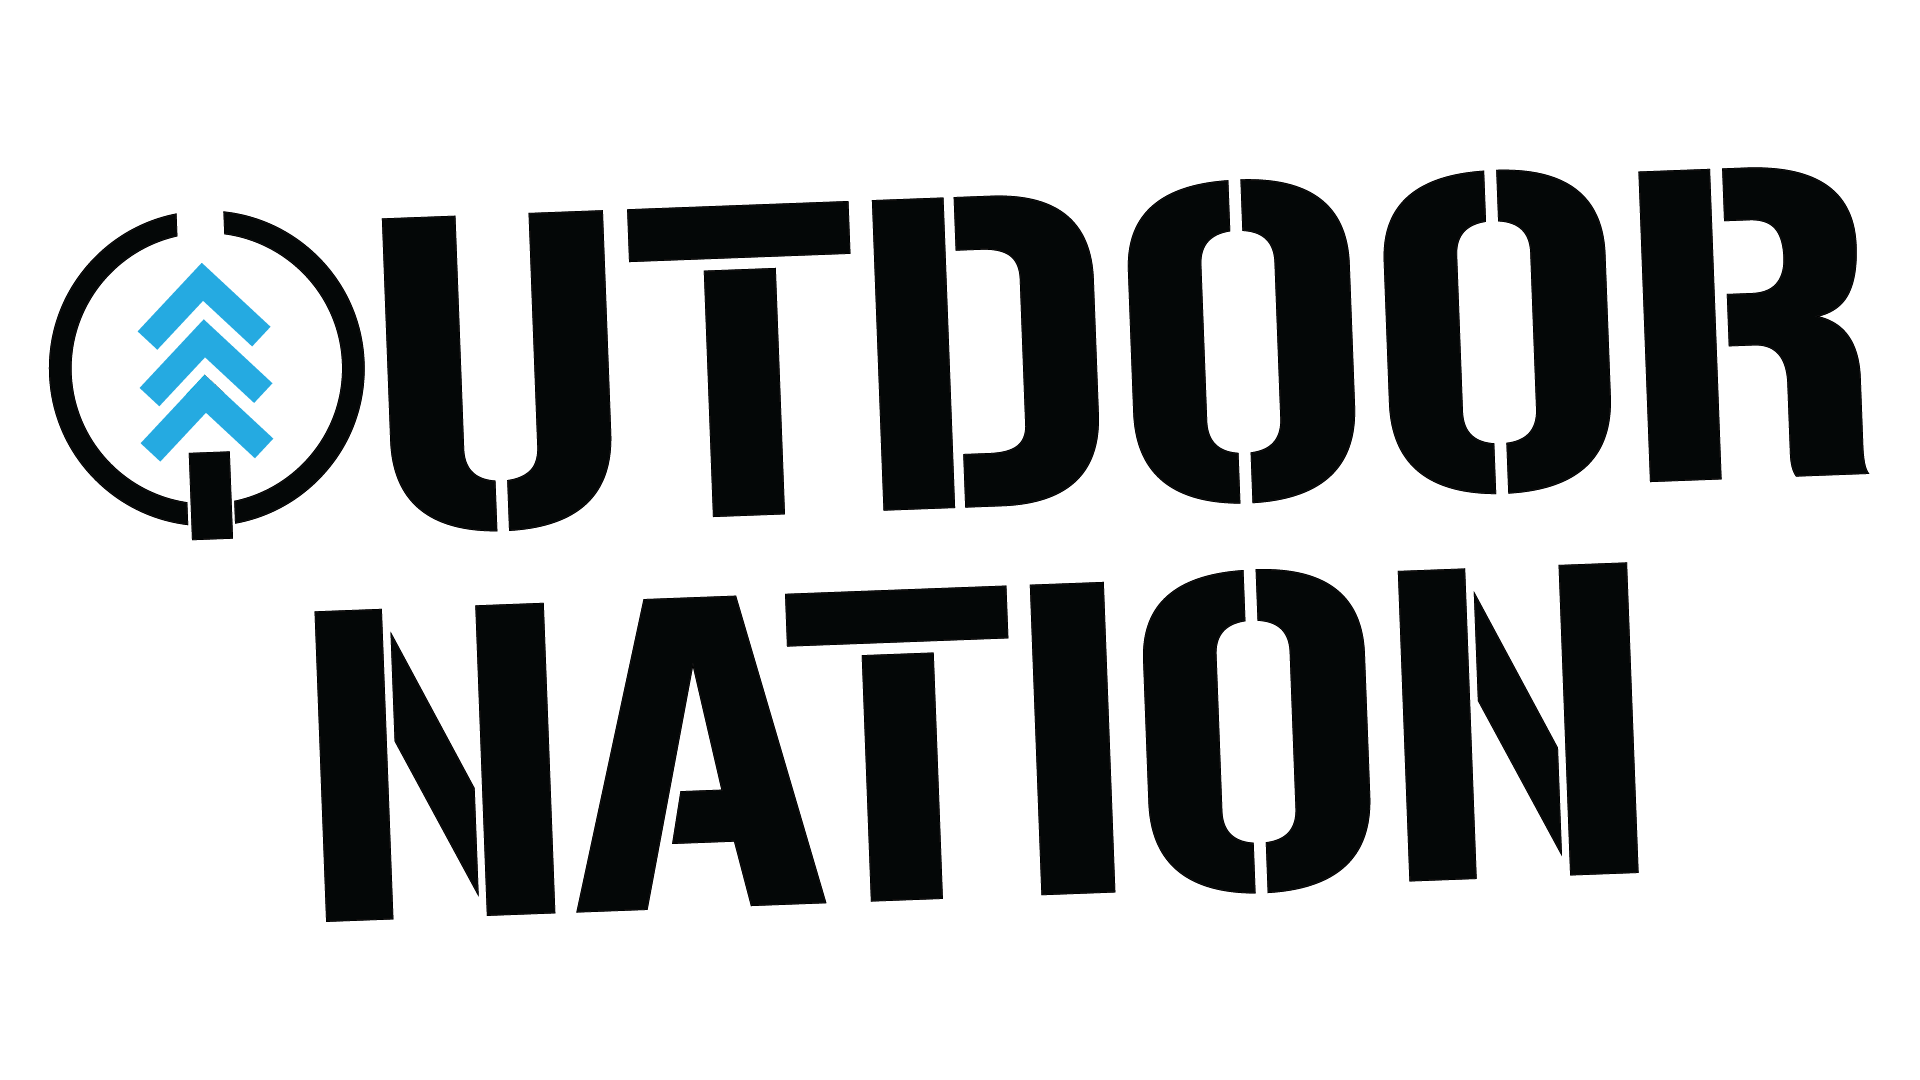 Outdoor Nation